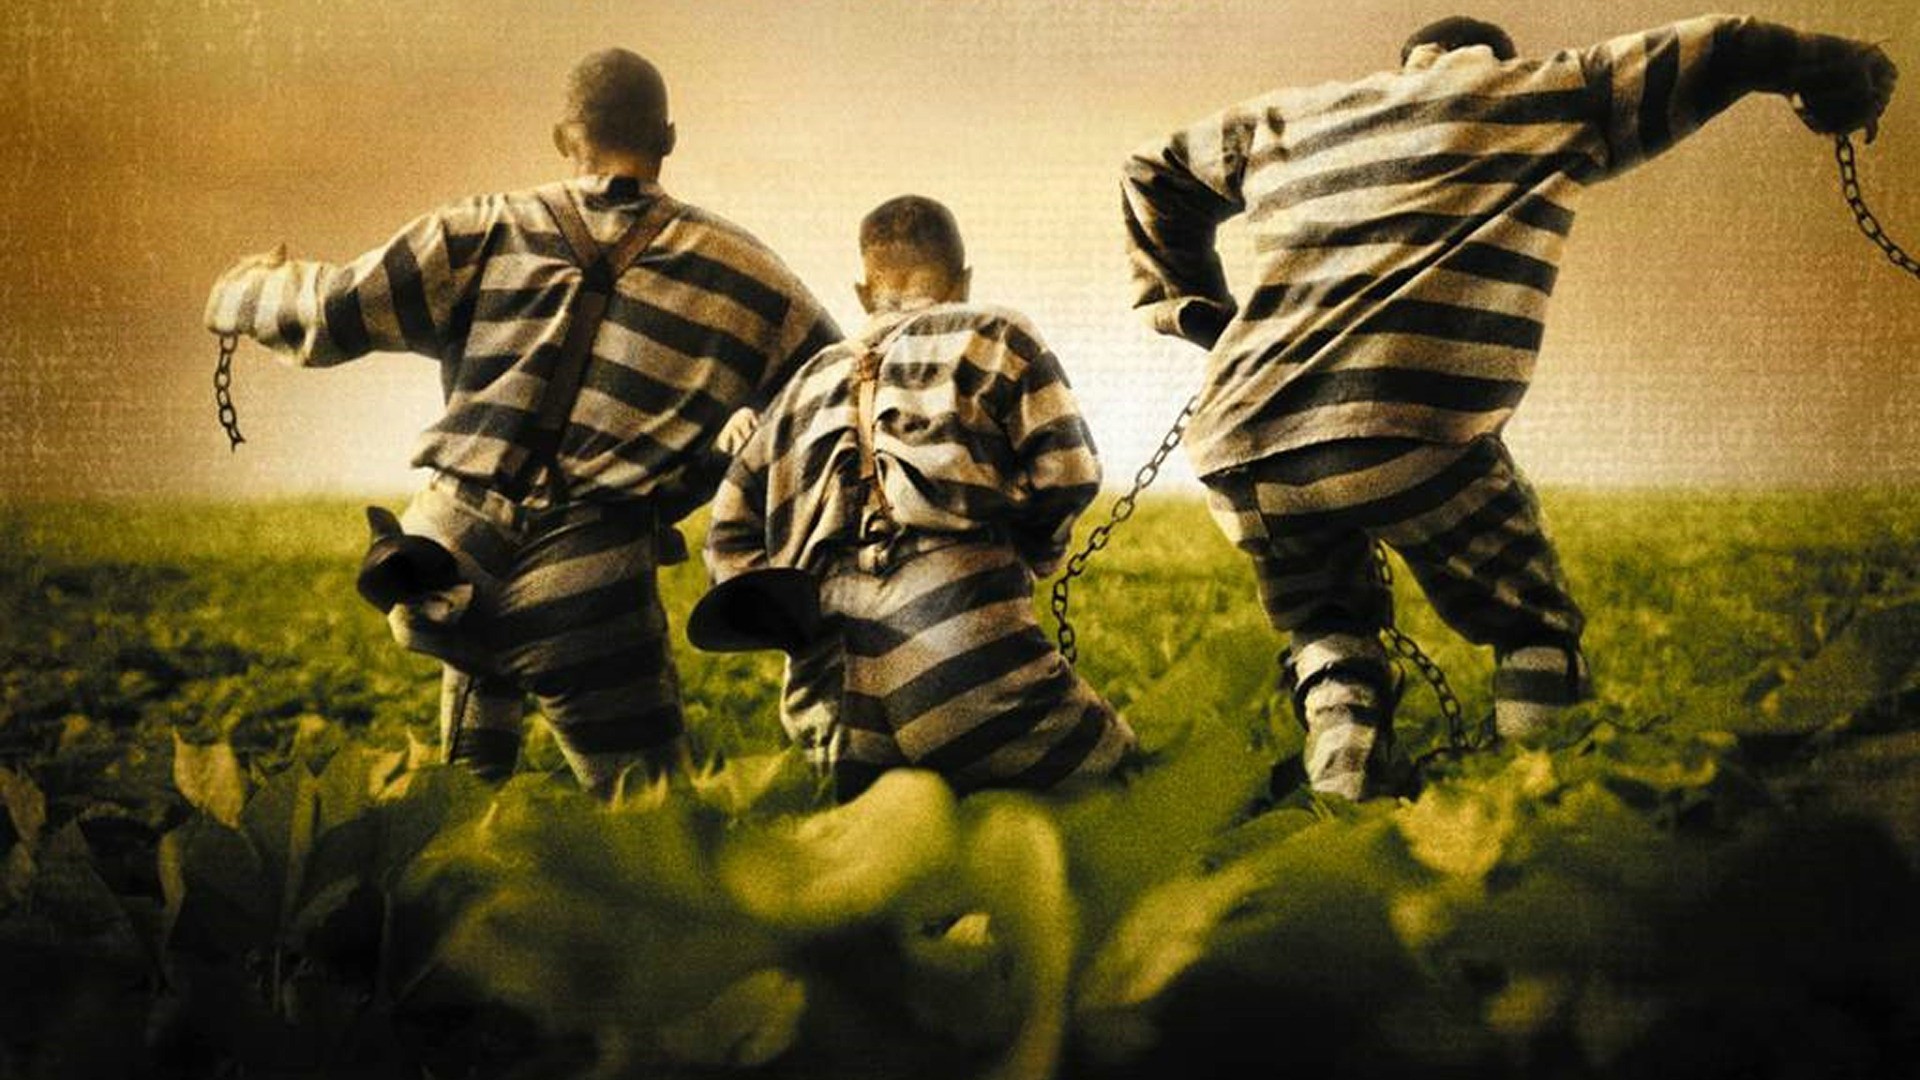 Prisoners Movies O Brother Where Art Thou 2000 Year Humor 1920x1080